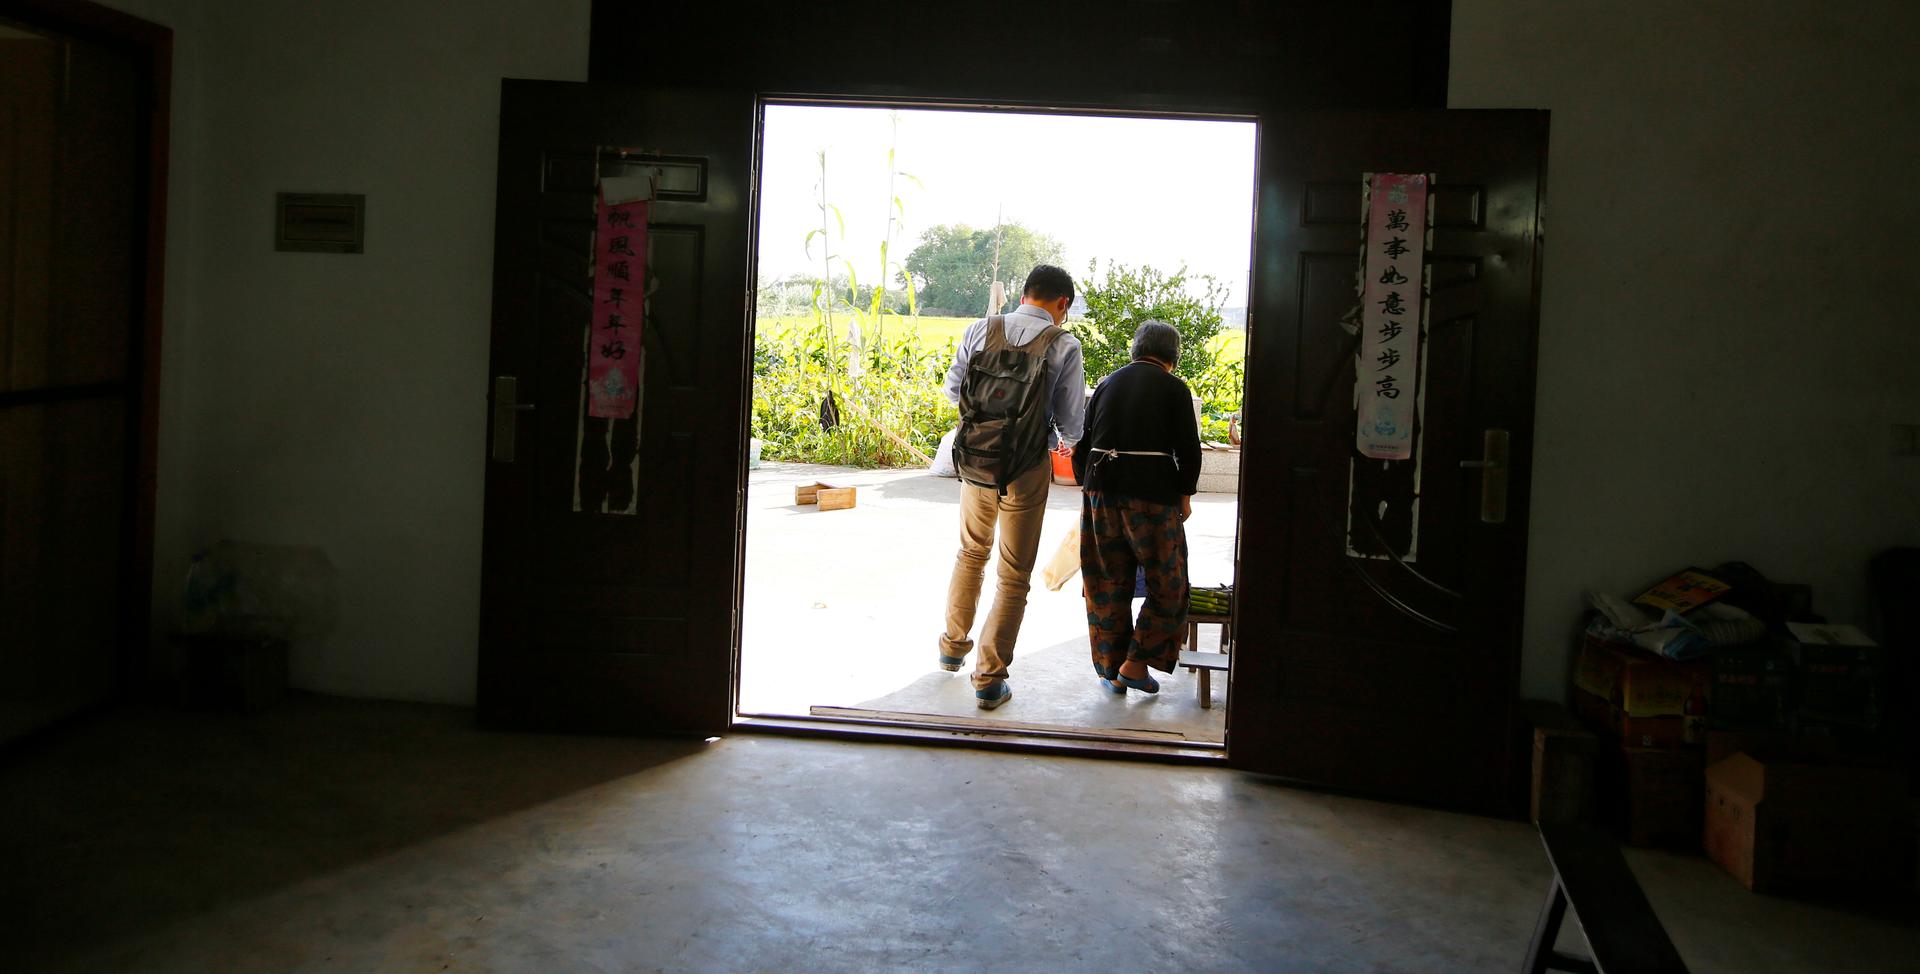 Wang Yufang and her grandson, Gu Hangyu, at her home on Chongming Island, near Shanghai. Gu says when he has a family, he'd like his son or daughter to speak his native Chongming dialect. Many young Chinese do not speak their grandparents' dialects.